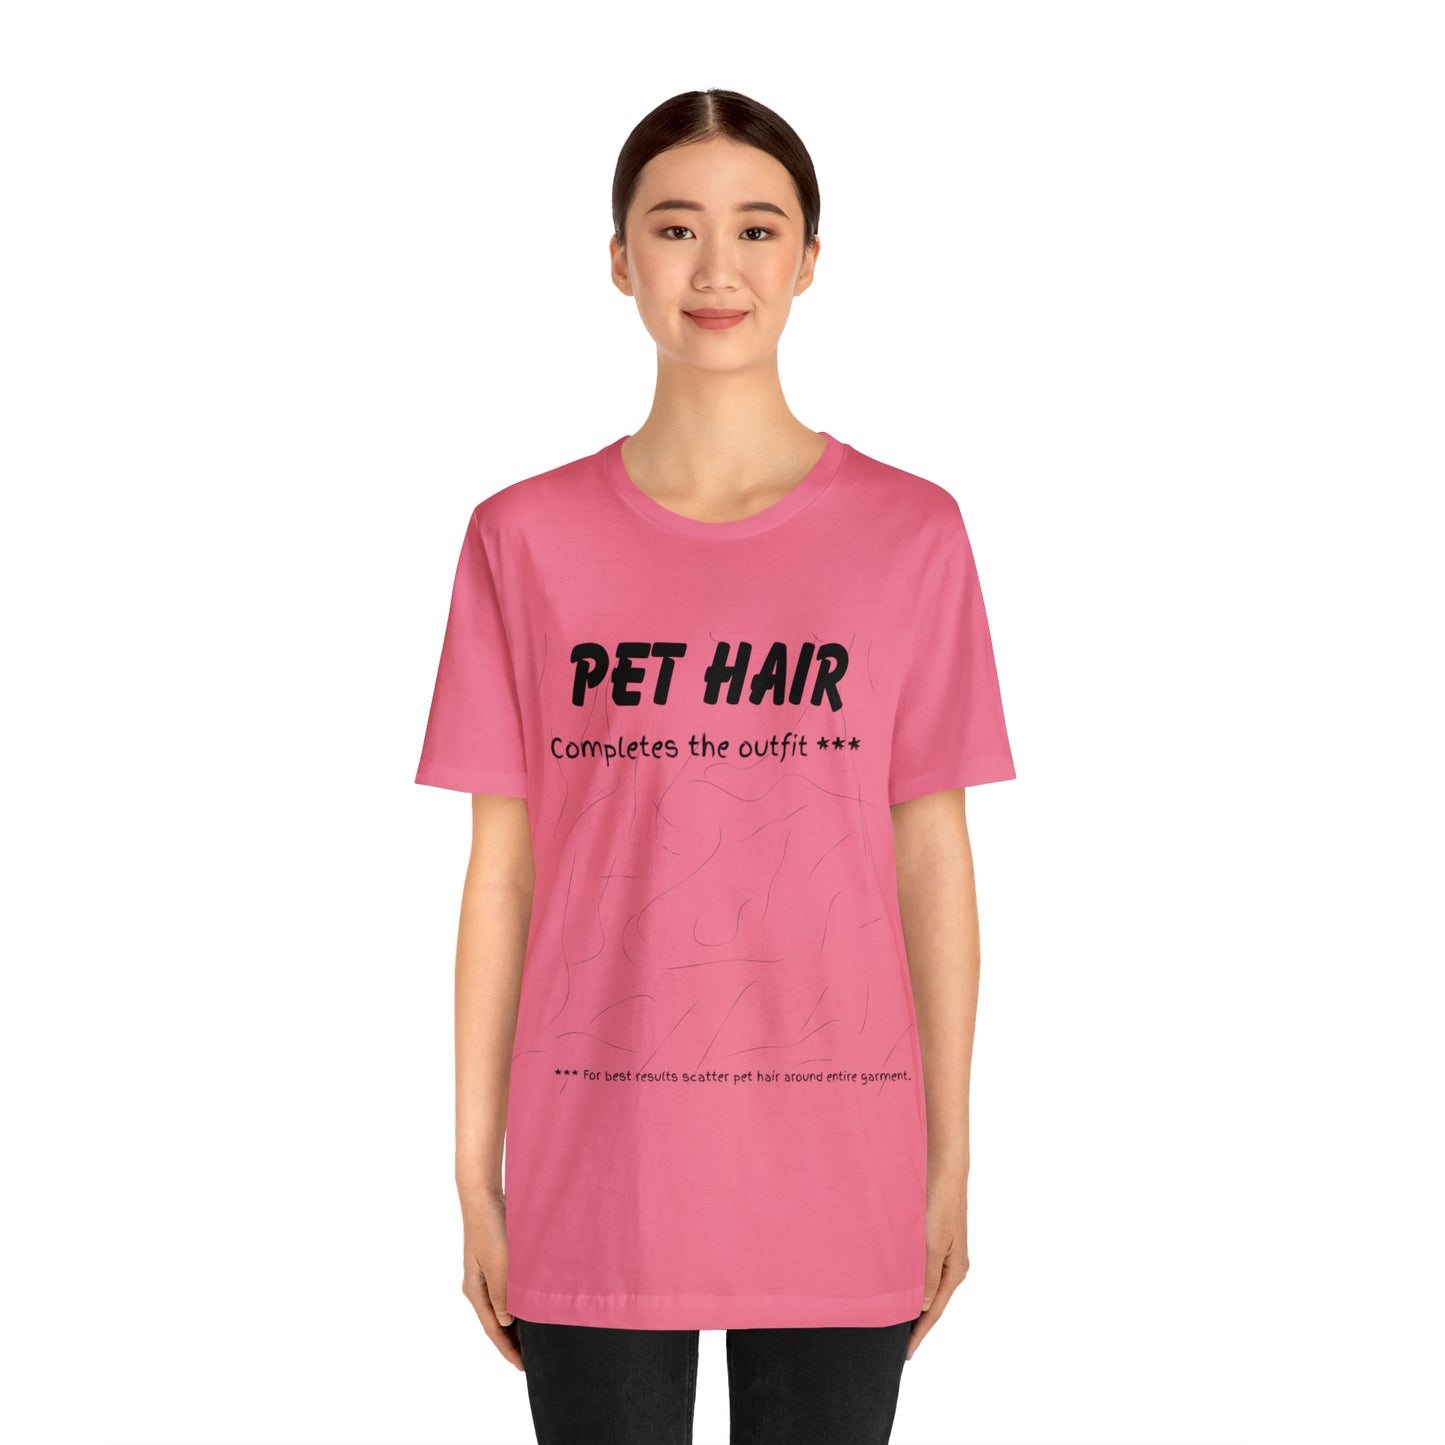 BLACK Pet Hair Completes the Outfit Unisex Jersey Tee